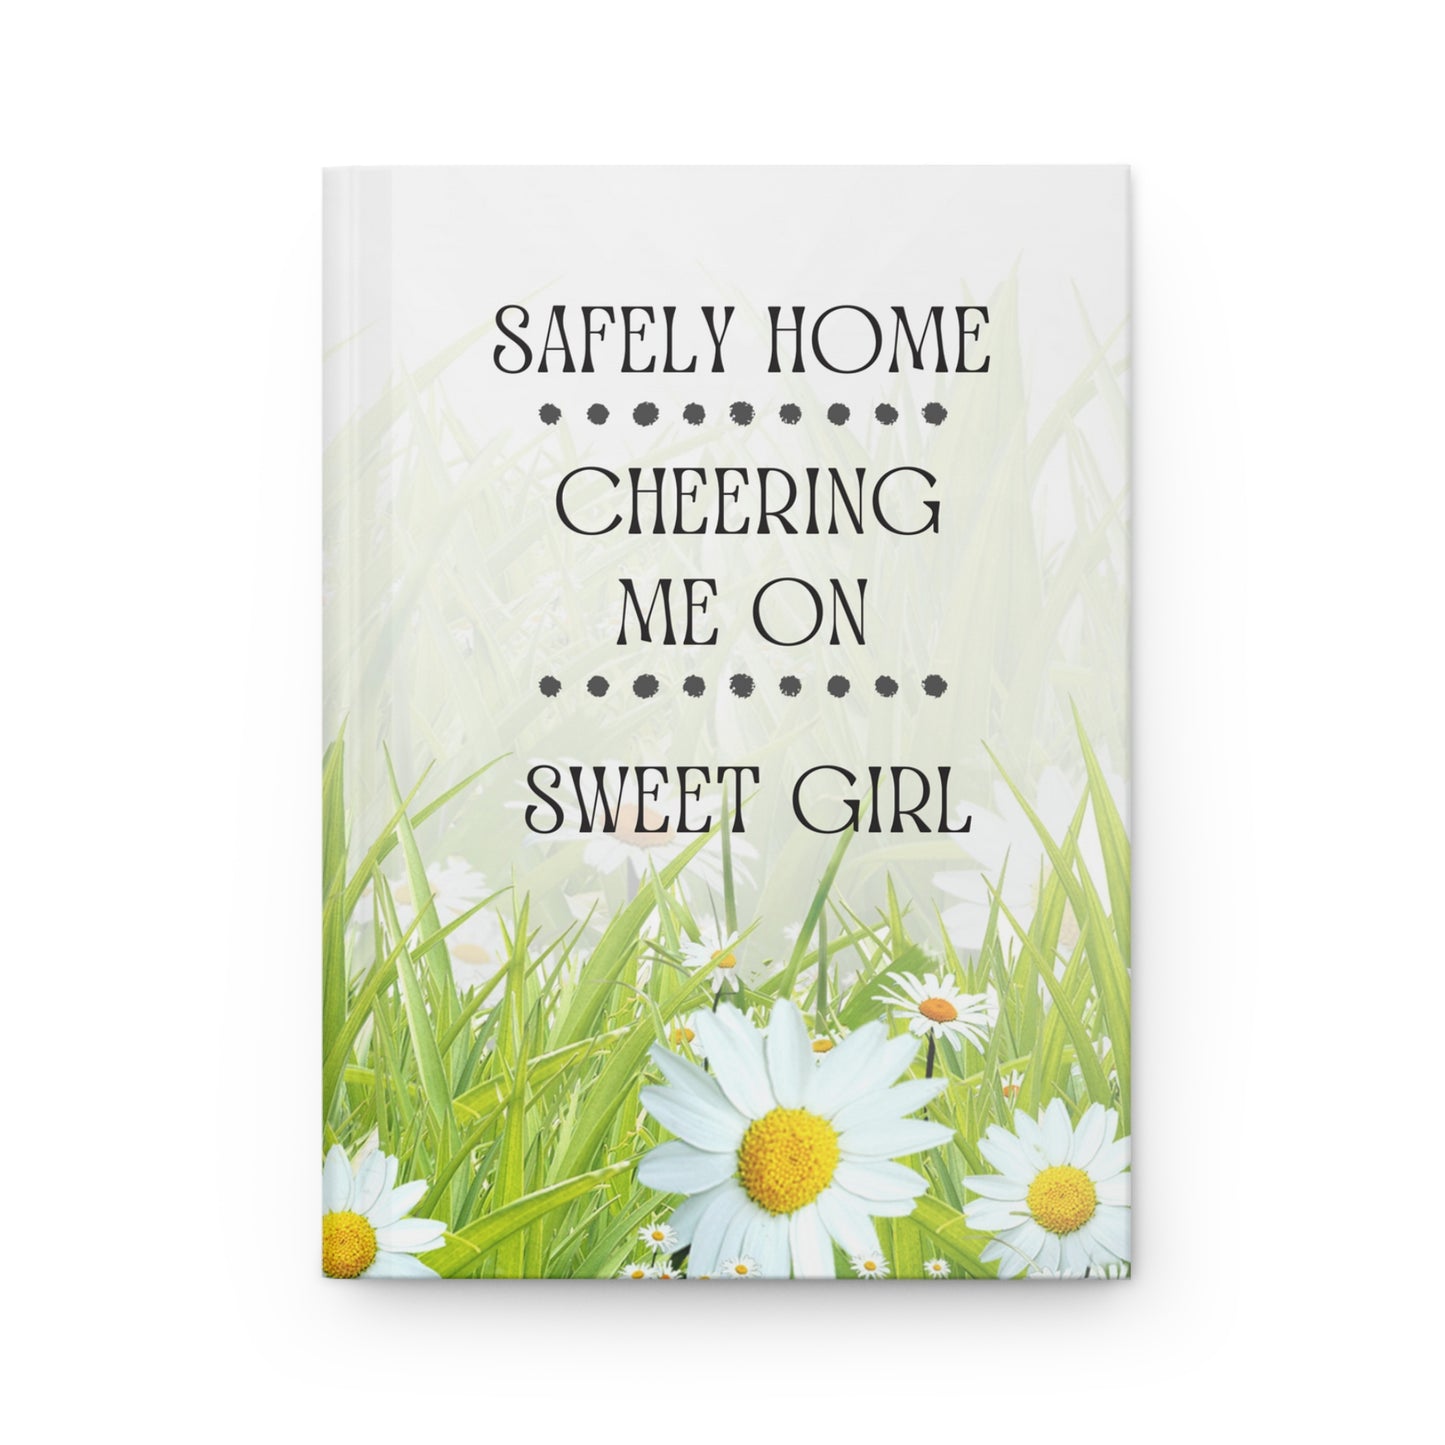 Grief Journal for Loss of Daughter, Granddaughter, Niece, Safely Home Cheering Me On